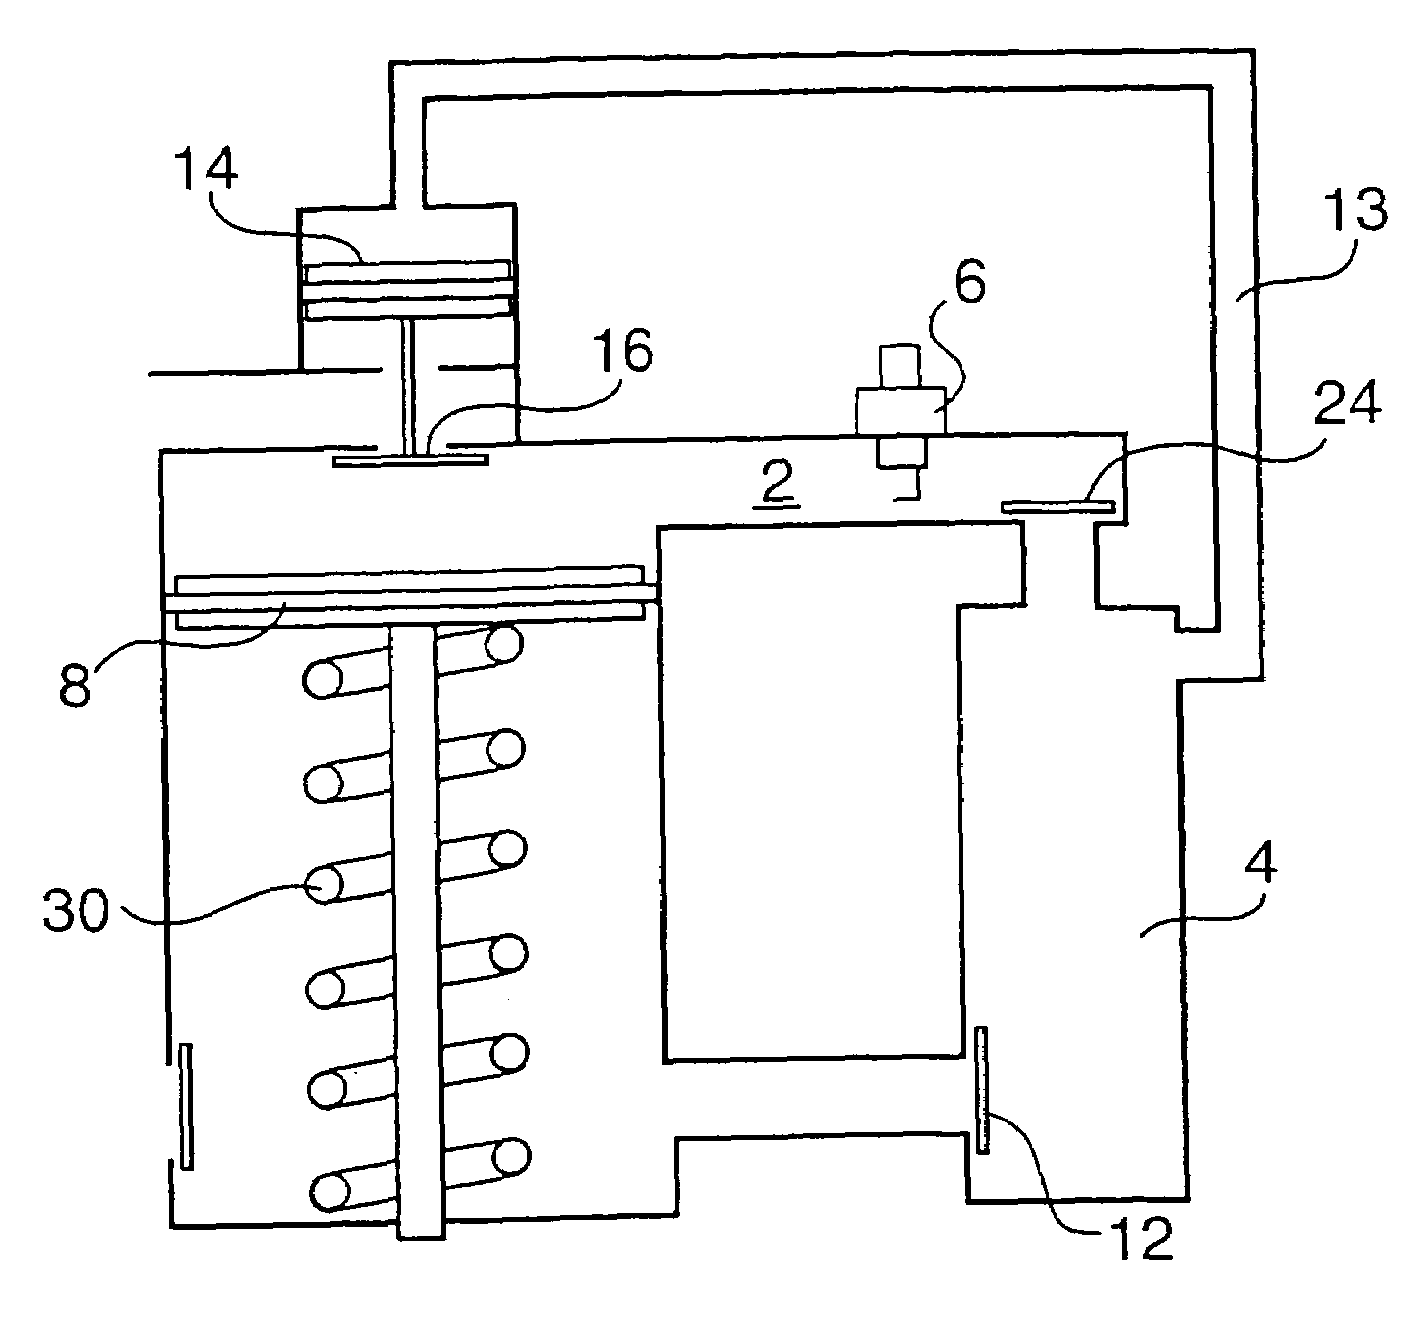 Scavenging system for intermittent linear motor